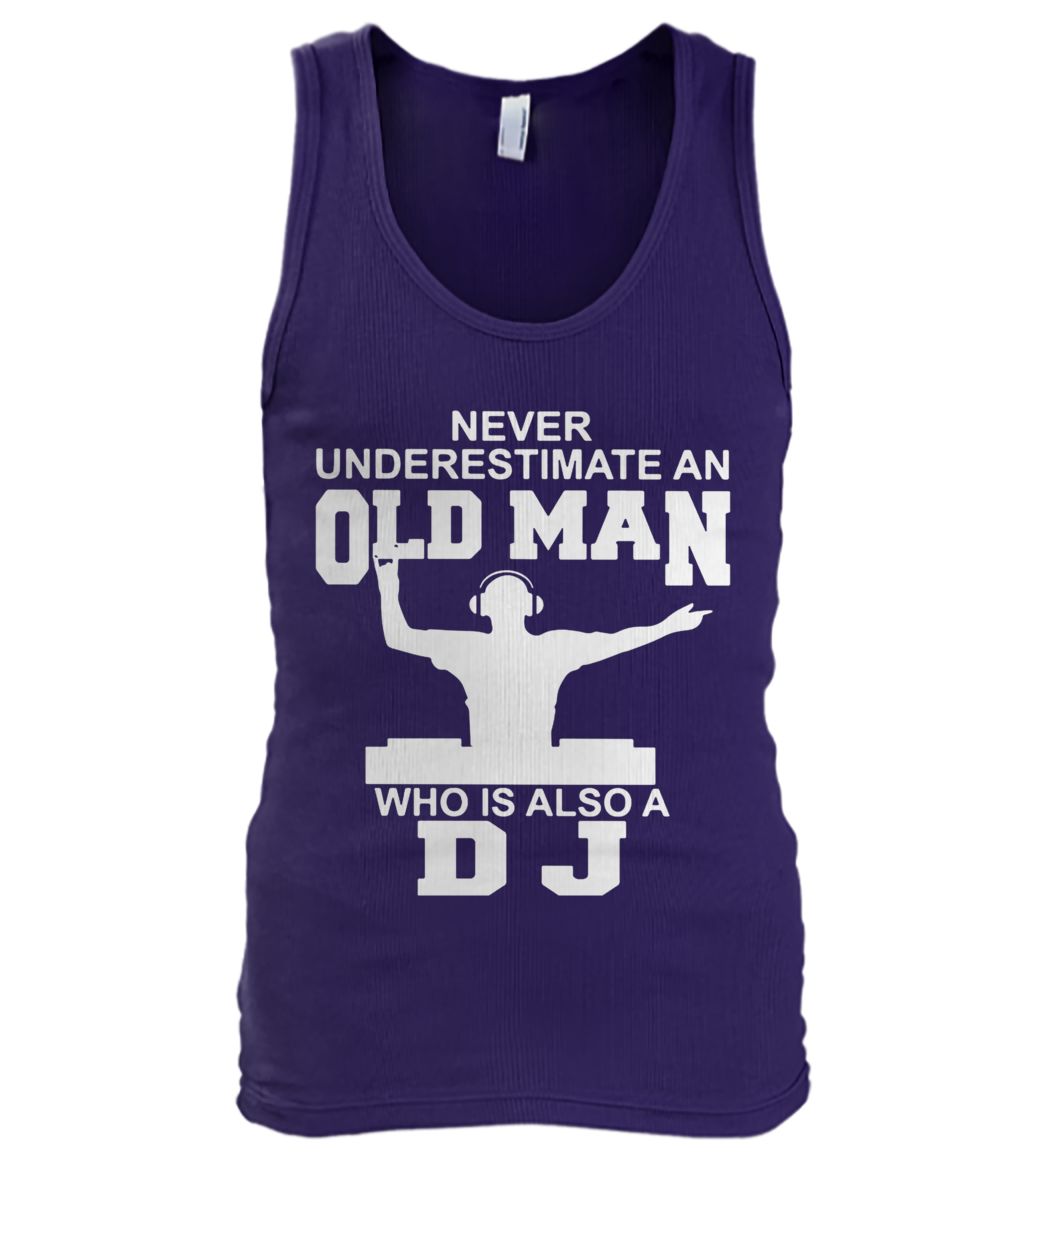 Never underestimate an old man who is also a DJ men's tank top